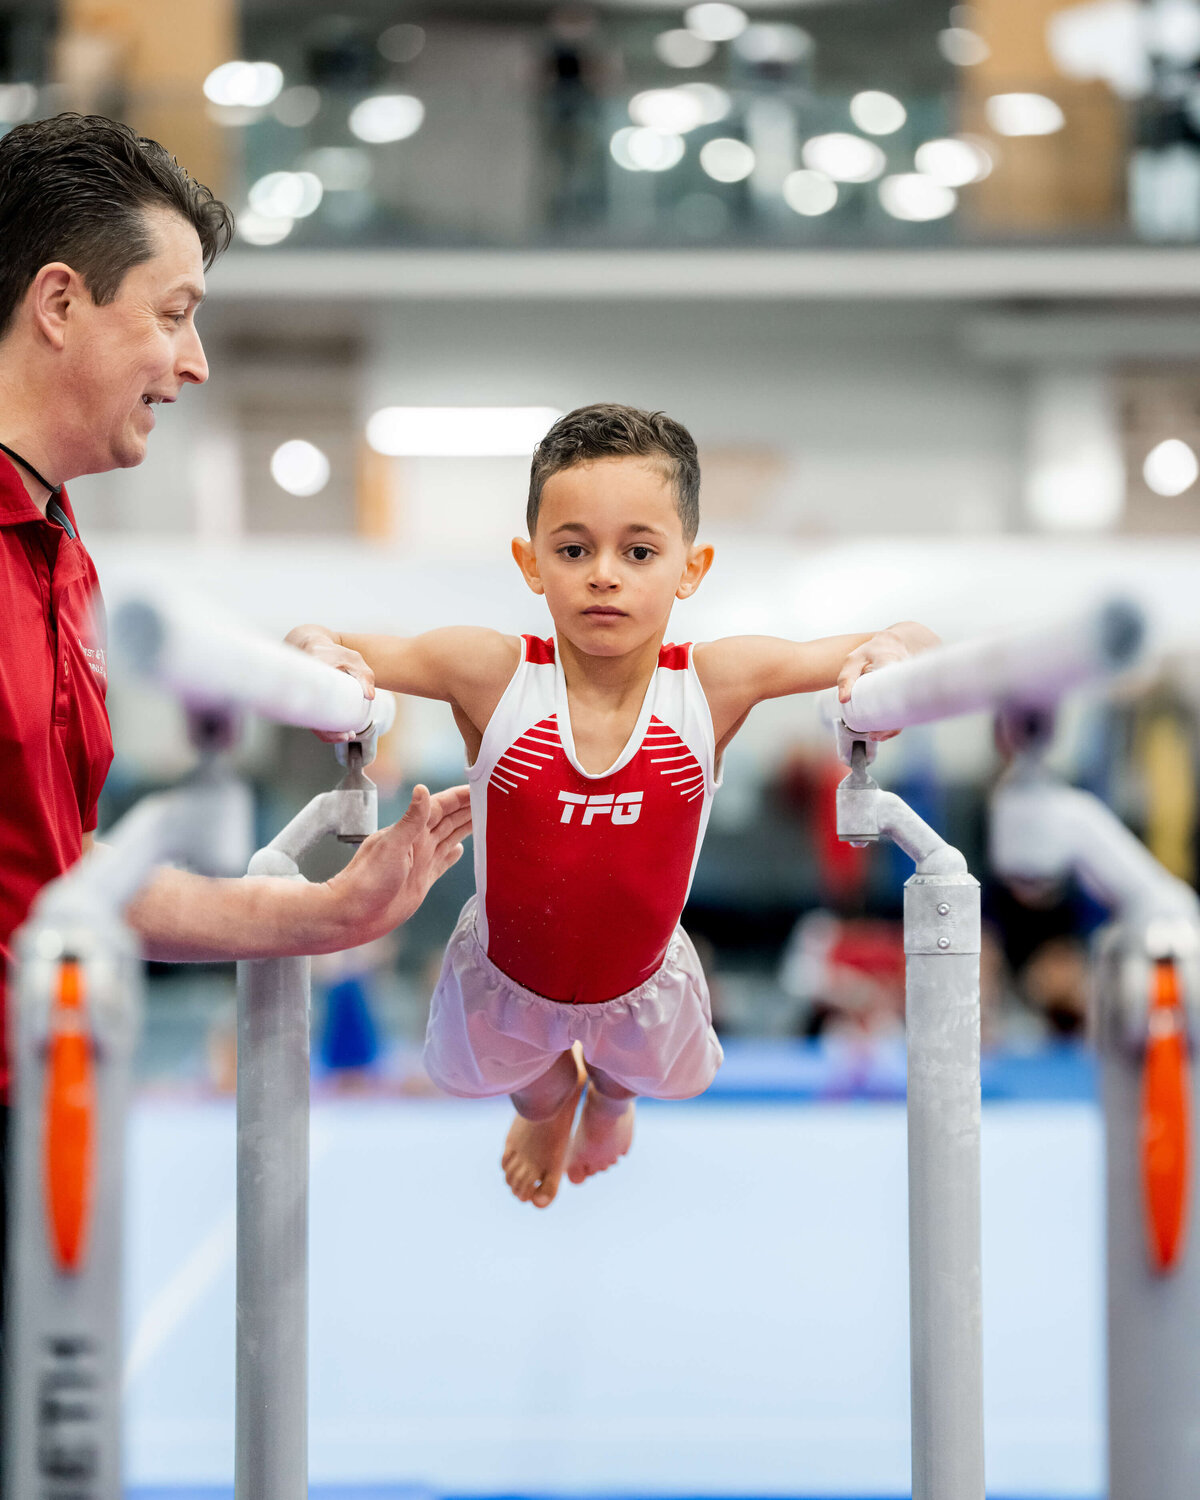 Photo by Luke O'Geil taken at the 2023 inaugural Grizzly Classic men's artistic gymnastics competitionA1_06238